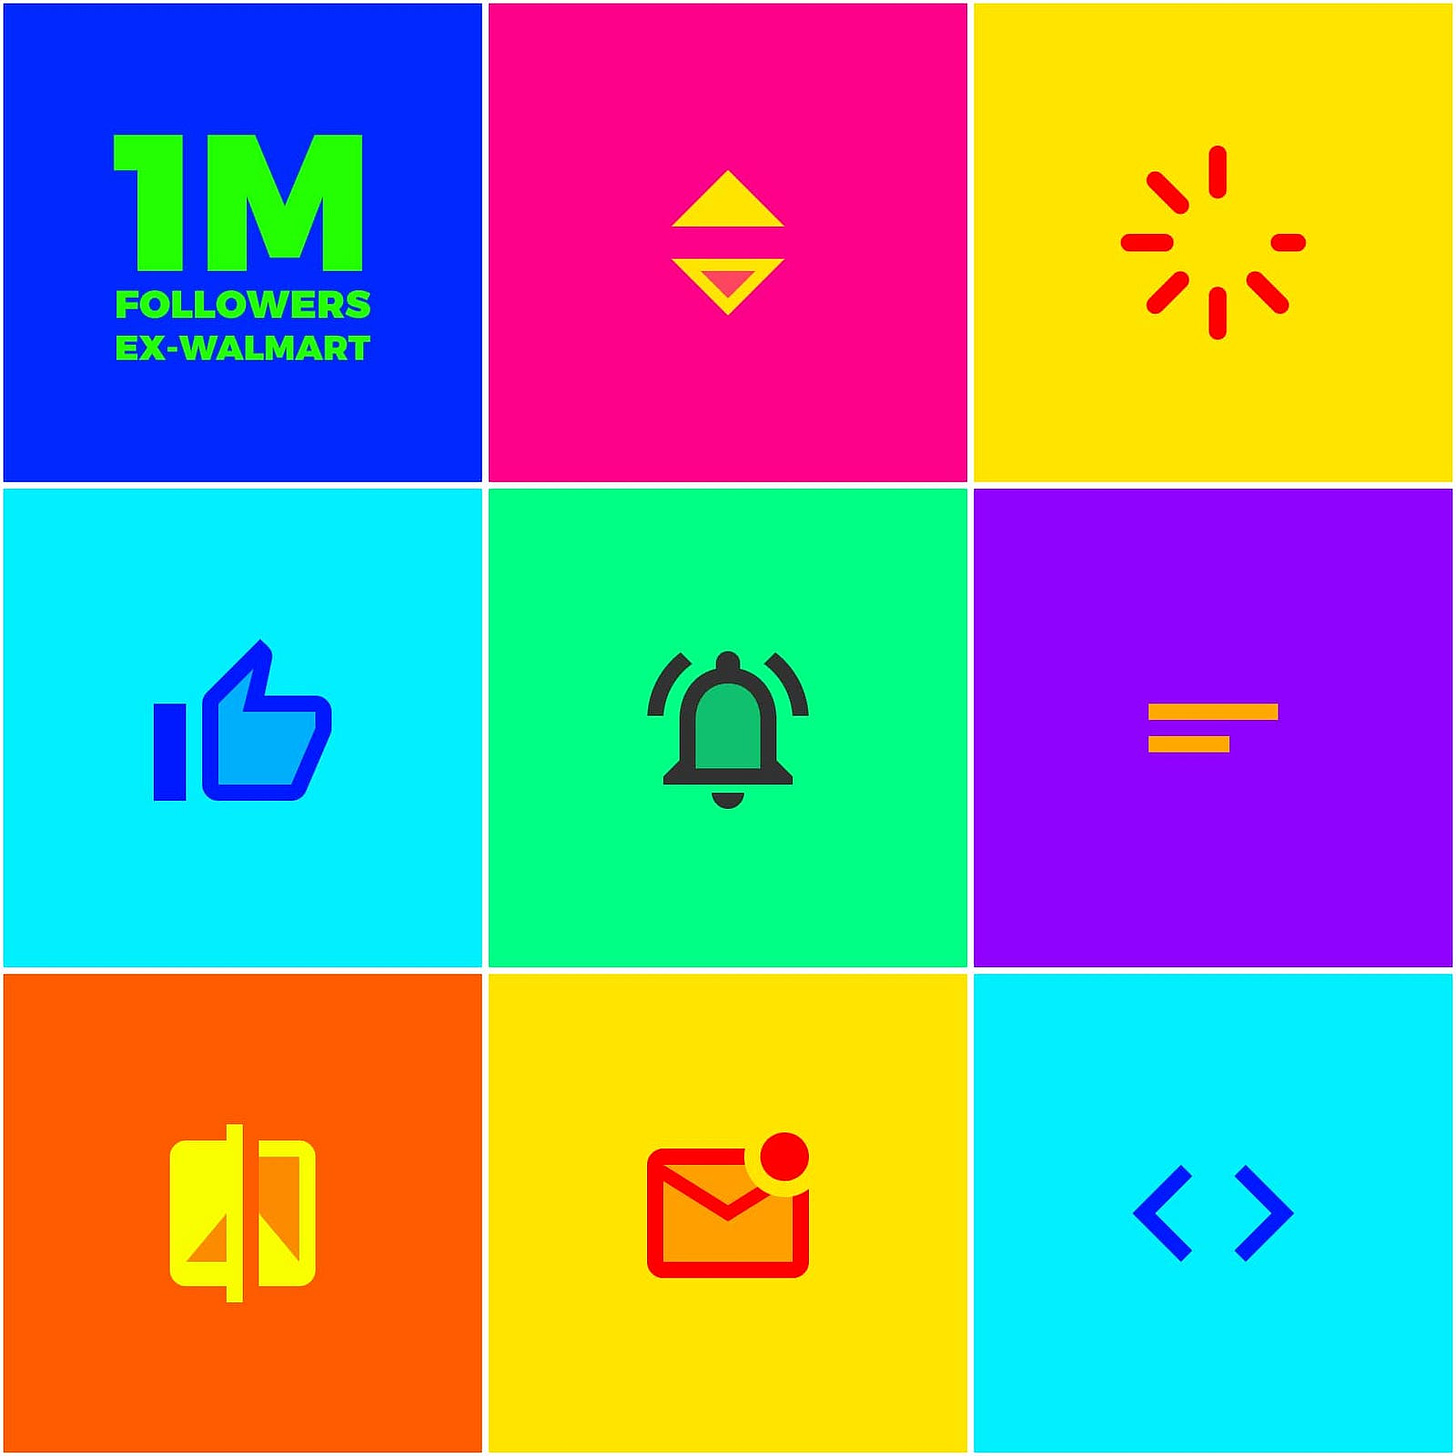 Collection of icons representing the 9 design interactions